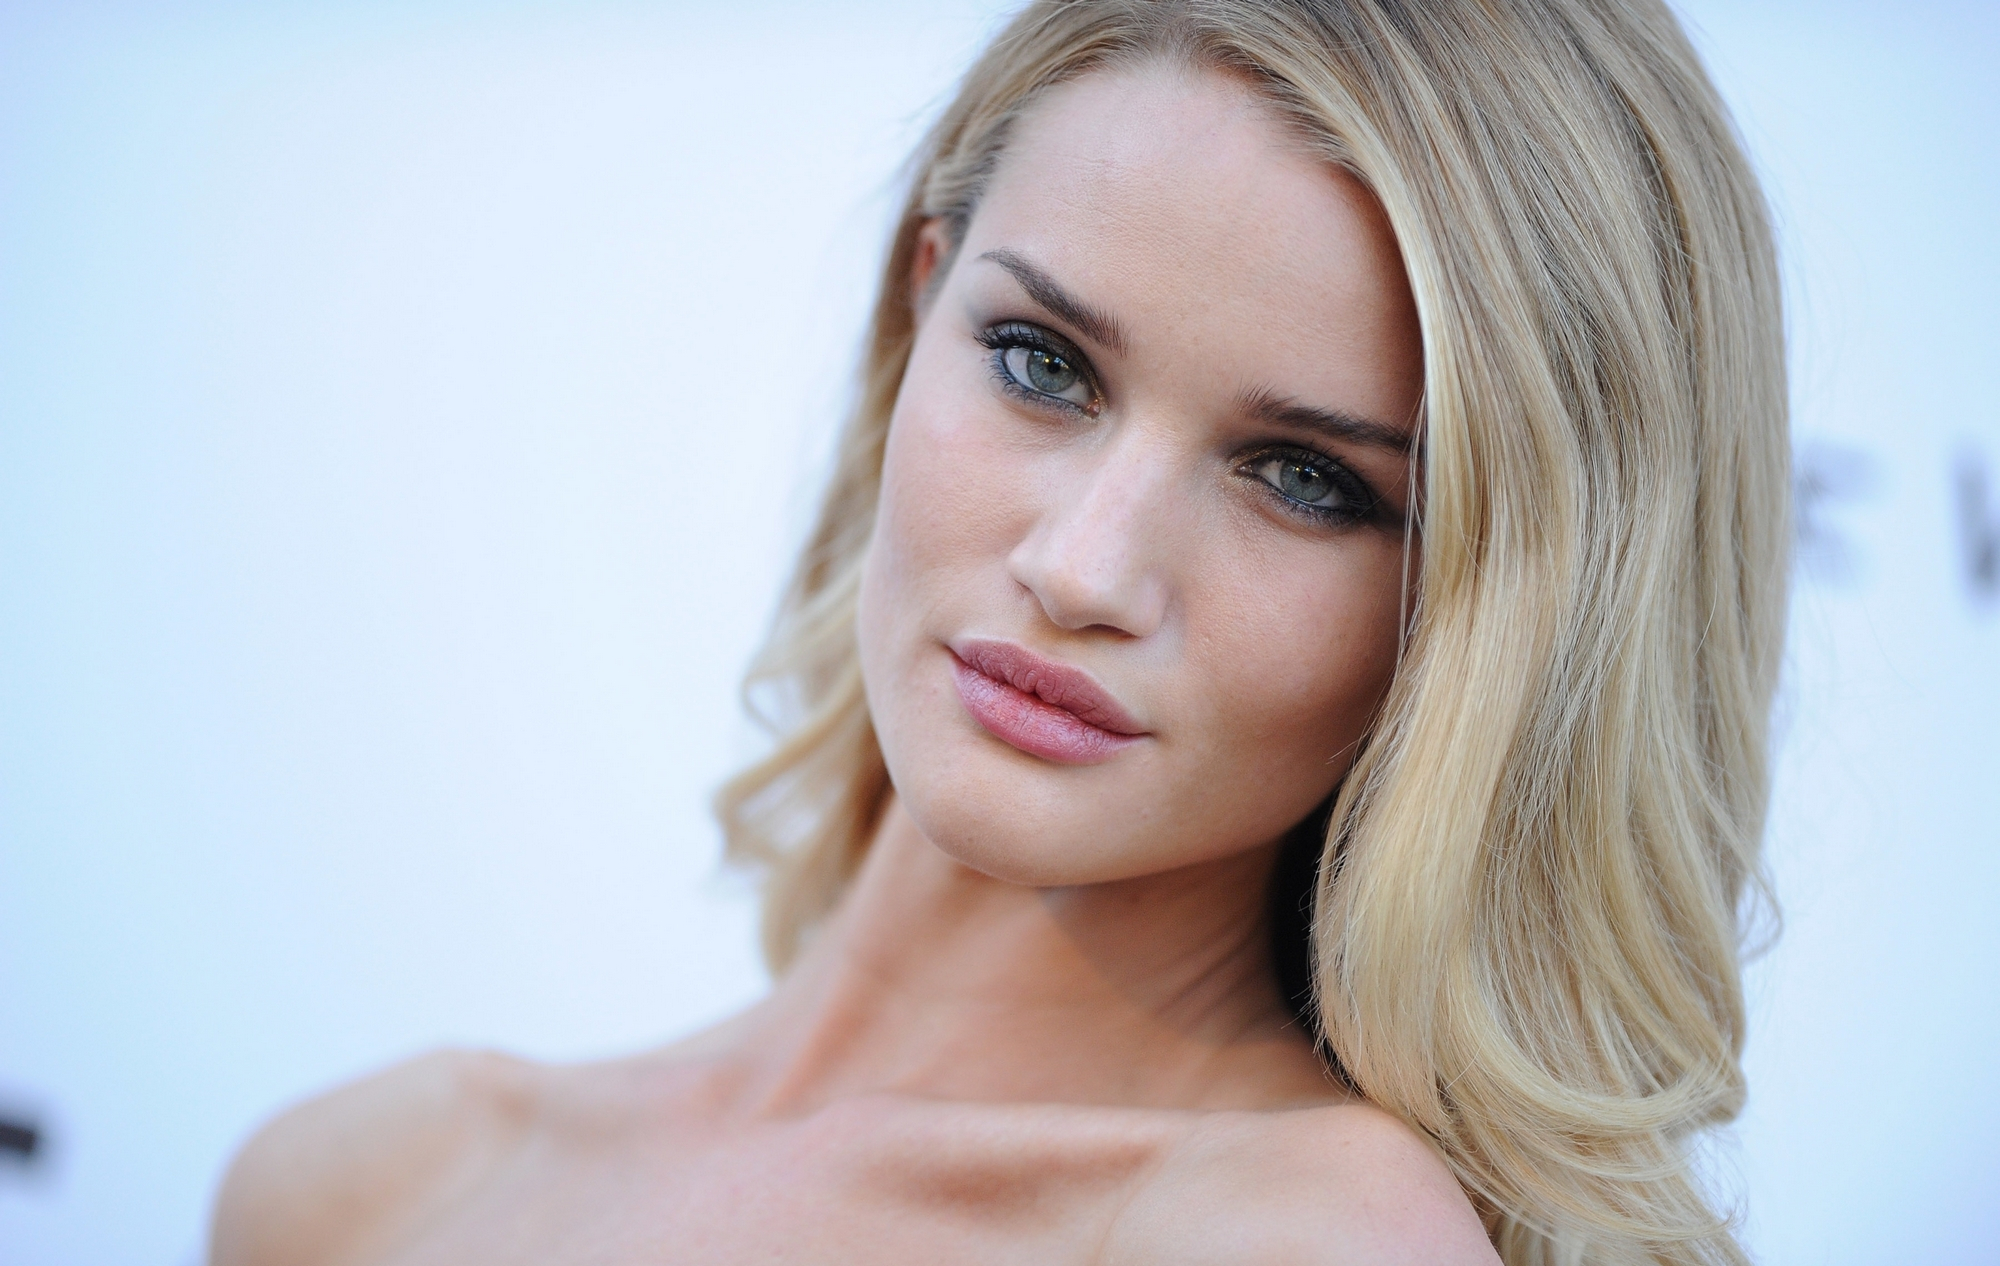 2000x1266 90+ Rosie Huntington-Whiteley HD Wallpapers and Backgrounds